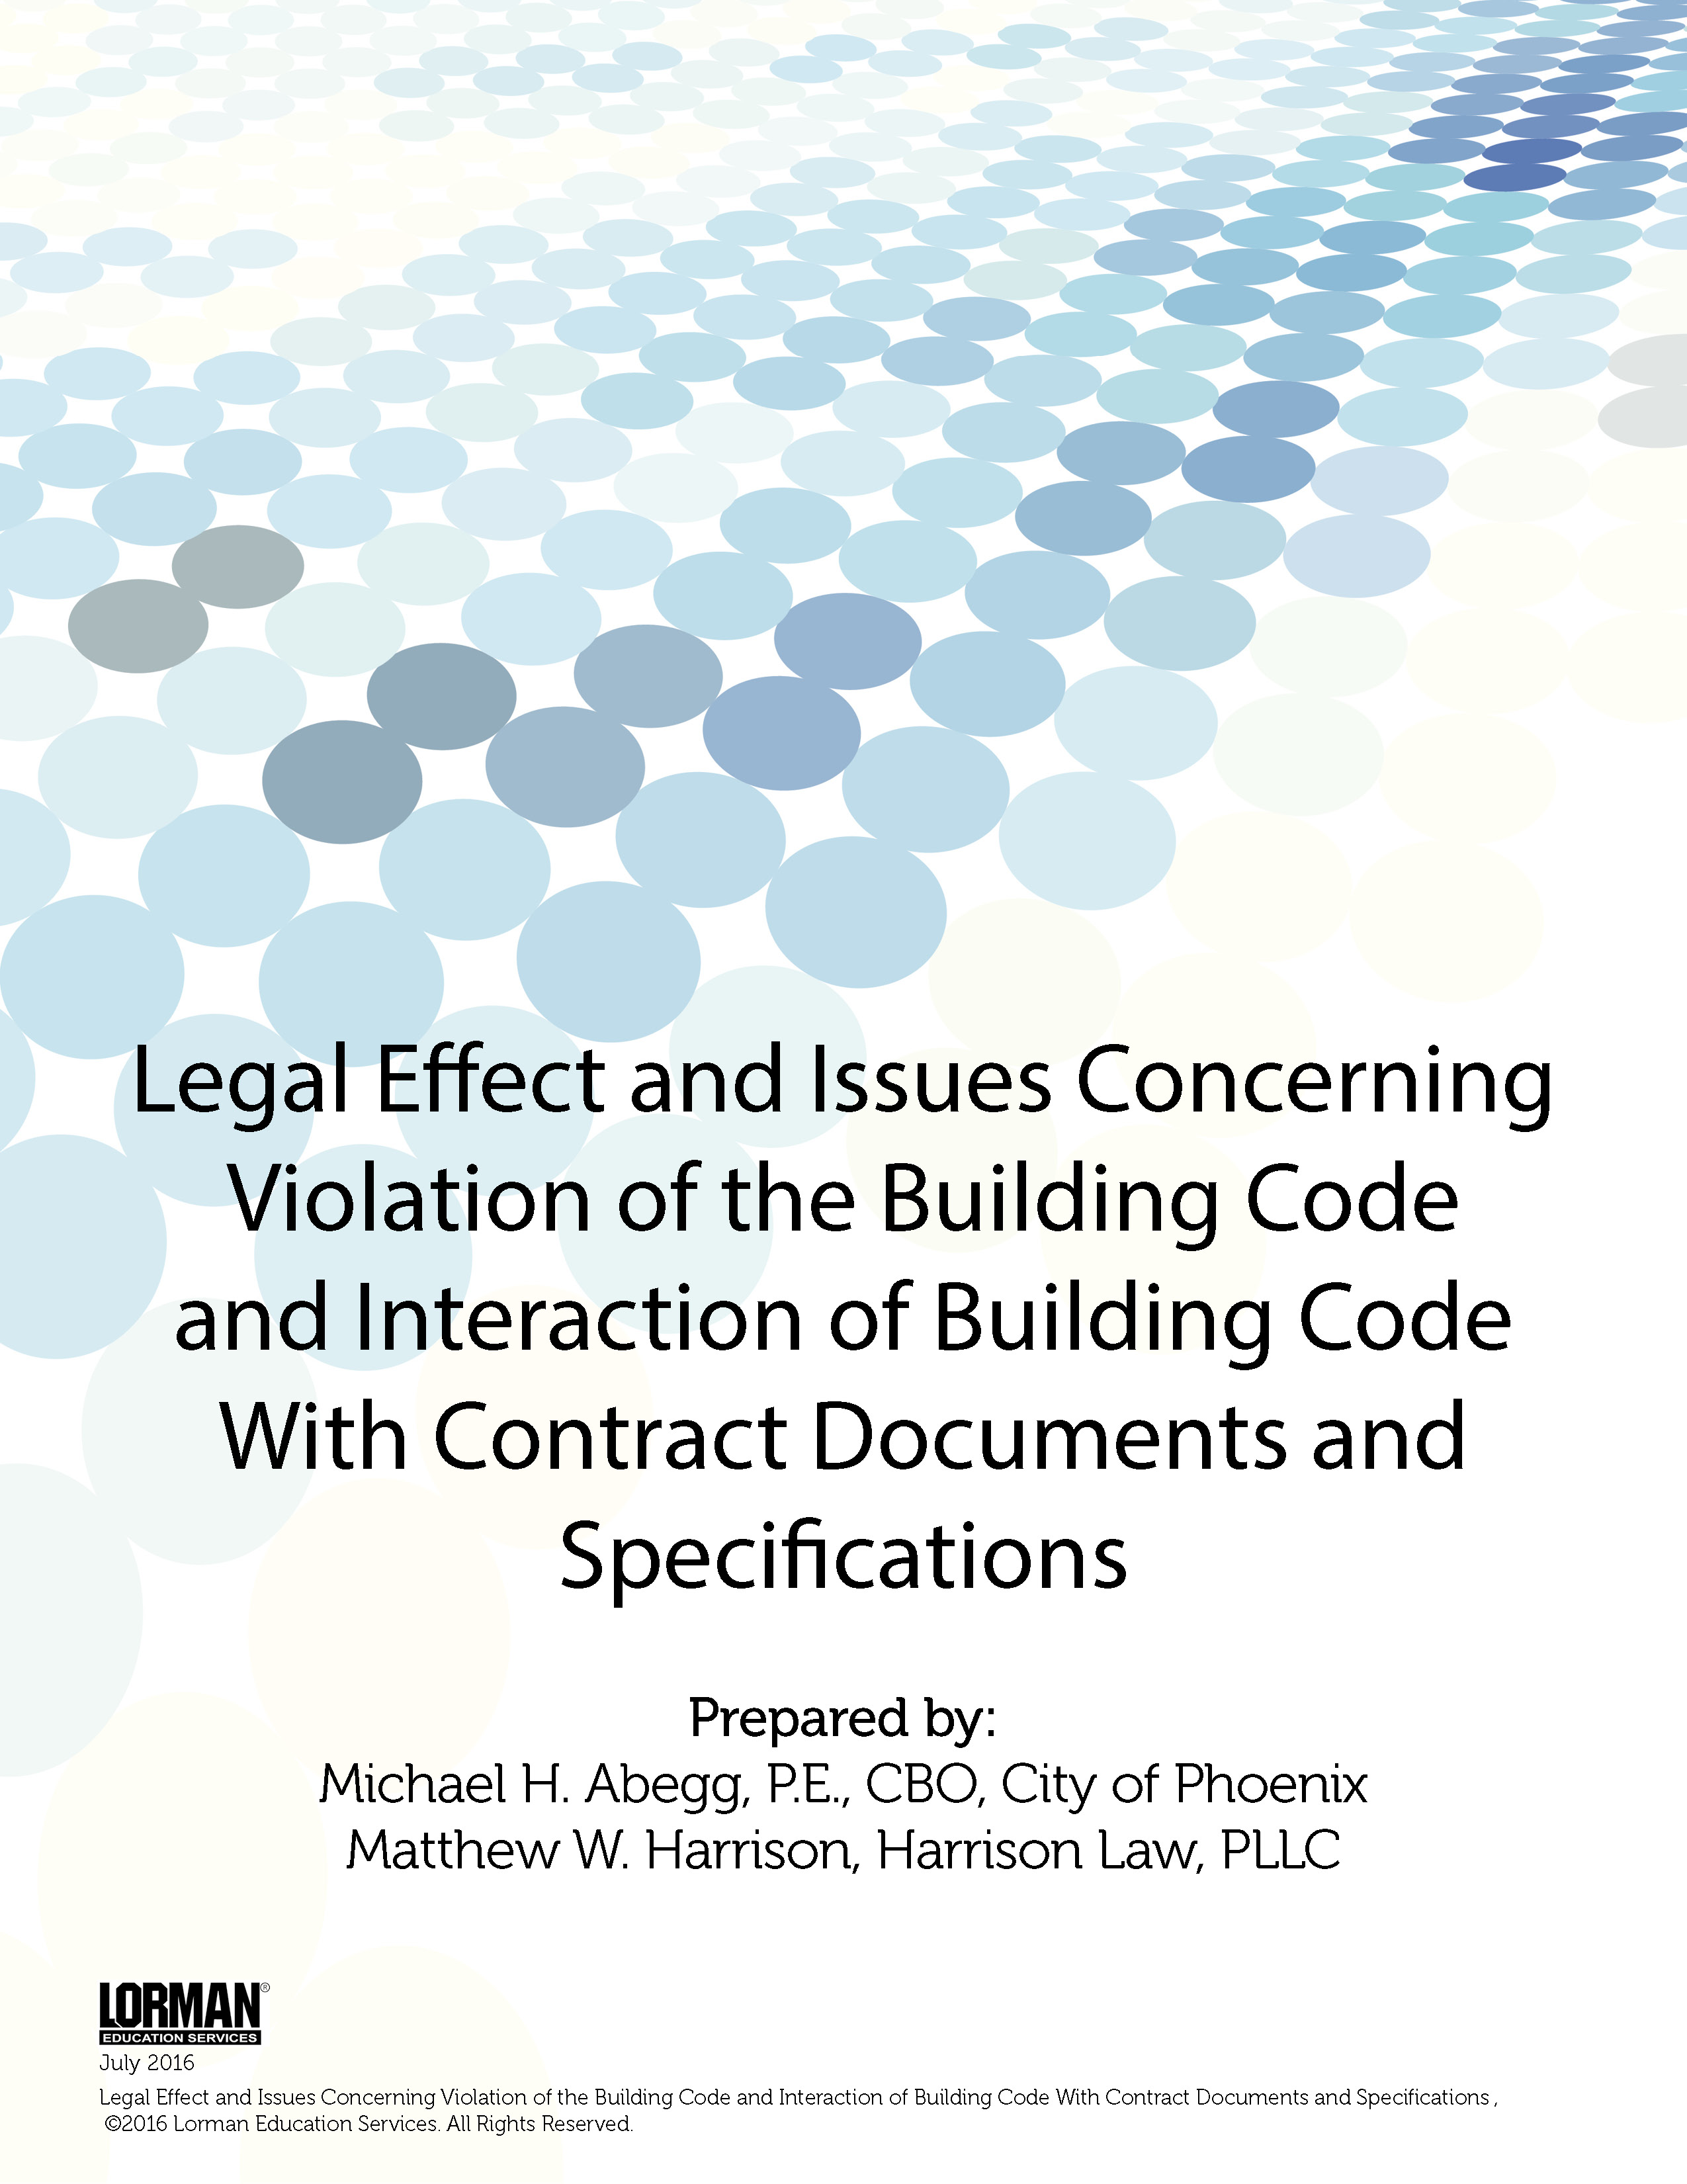 Legal Effect and Issues Concerning Violation of the Building Code and Interaction of Building Code With Contract Documents and Specifications